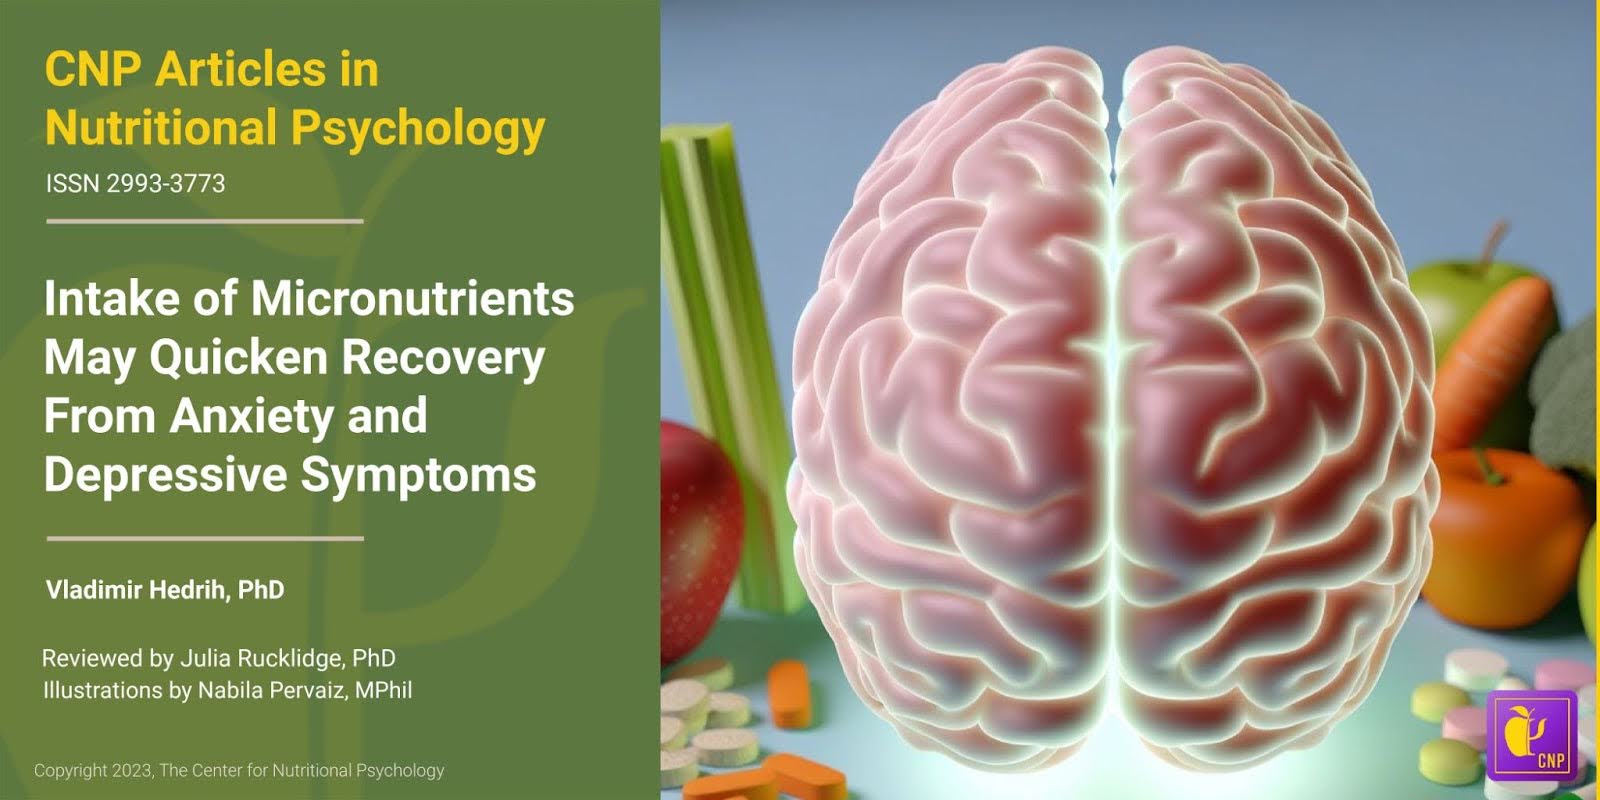 Intake of Micronutrients May Quicken Recovery From Anxiety and Depressive Symptoms